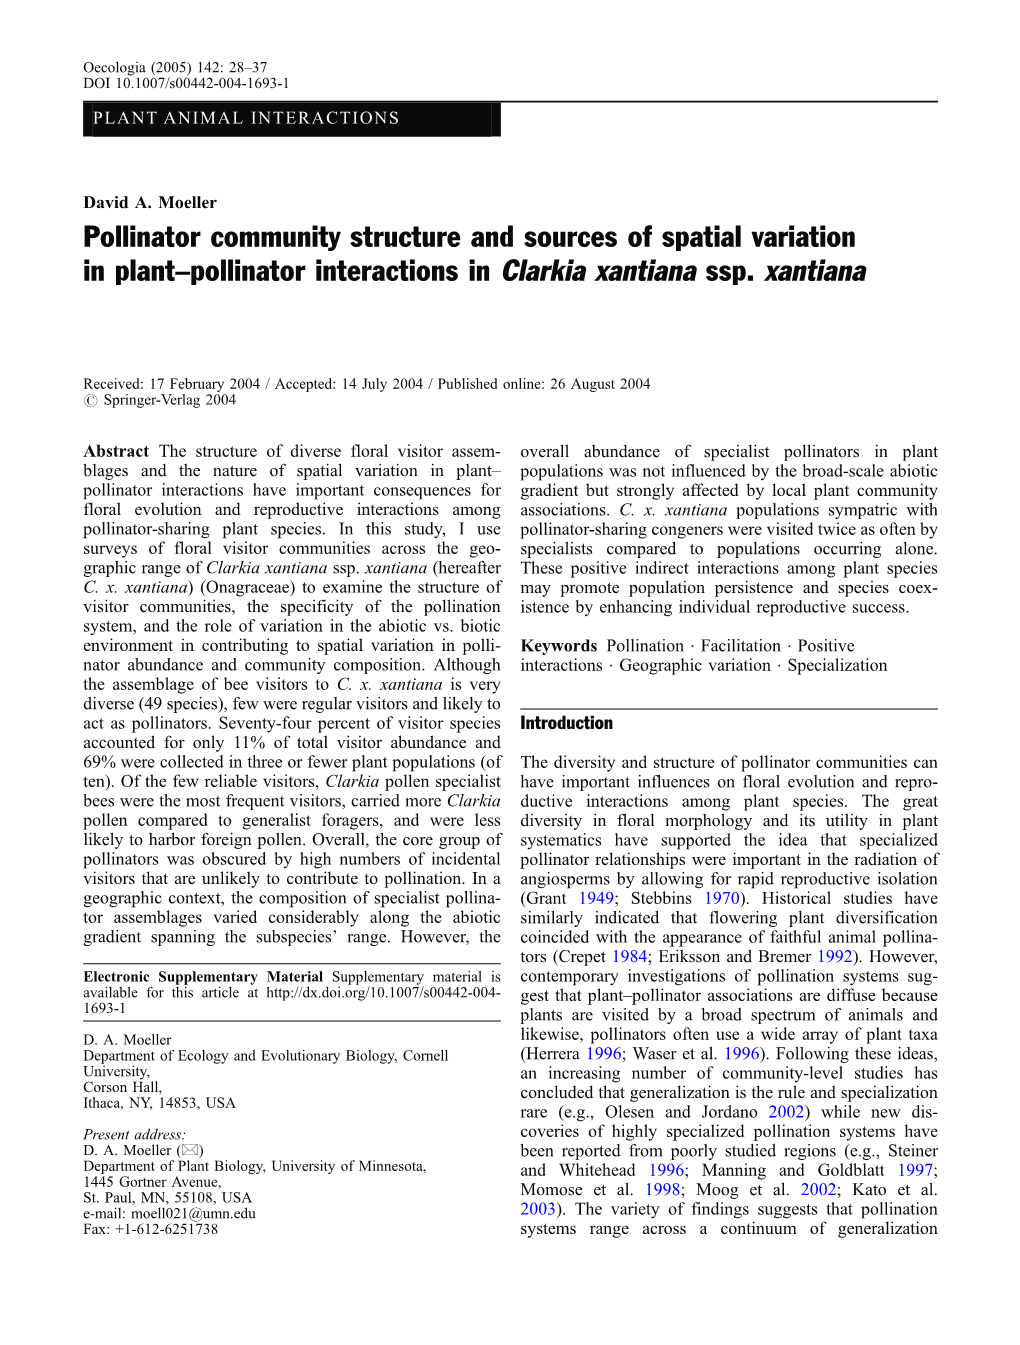 Pollinator Community Structure and Sources of Spatial Variation in Plant–Pollinator Interactions in Clarkia Xantiana Ssp